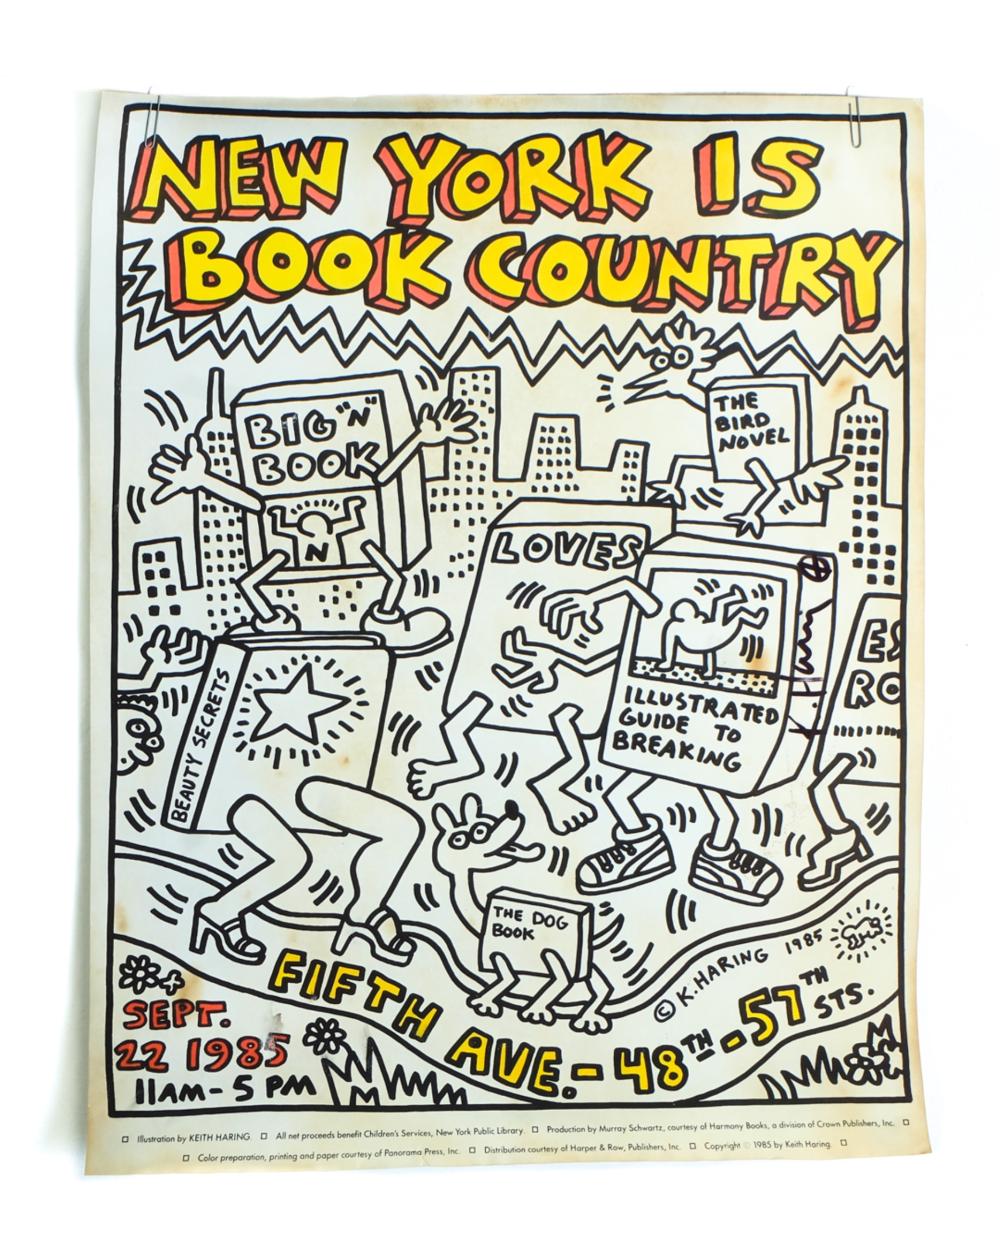 KEITH HARING "NEW YORK IS BOOK